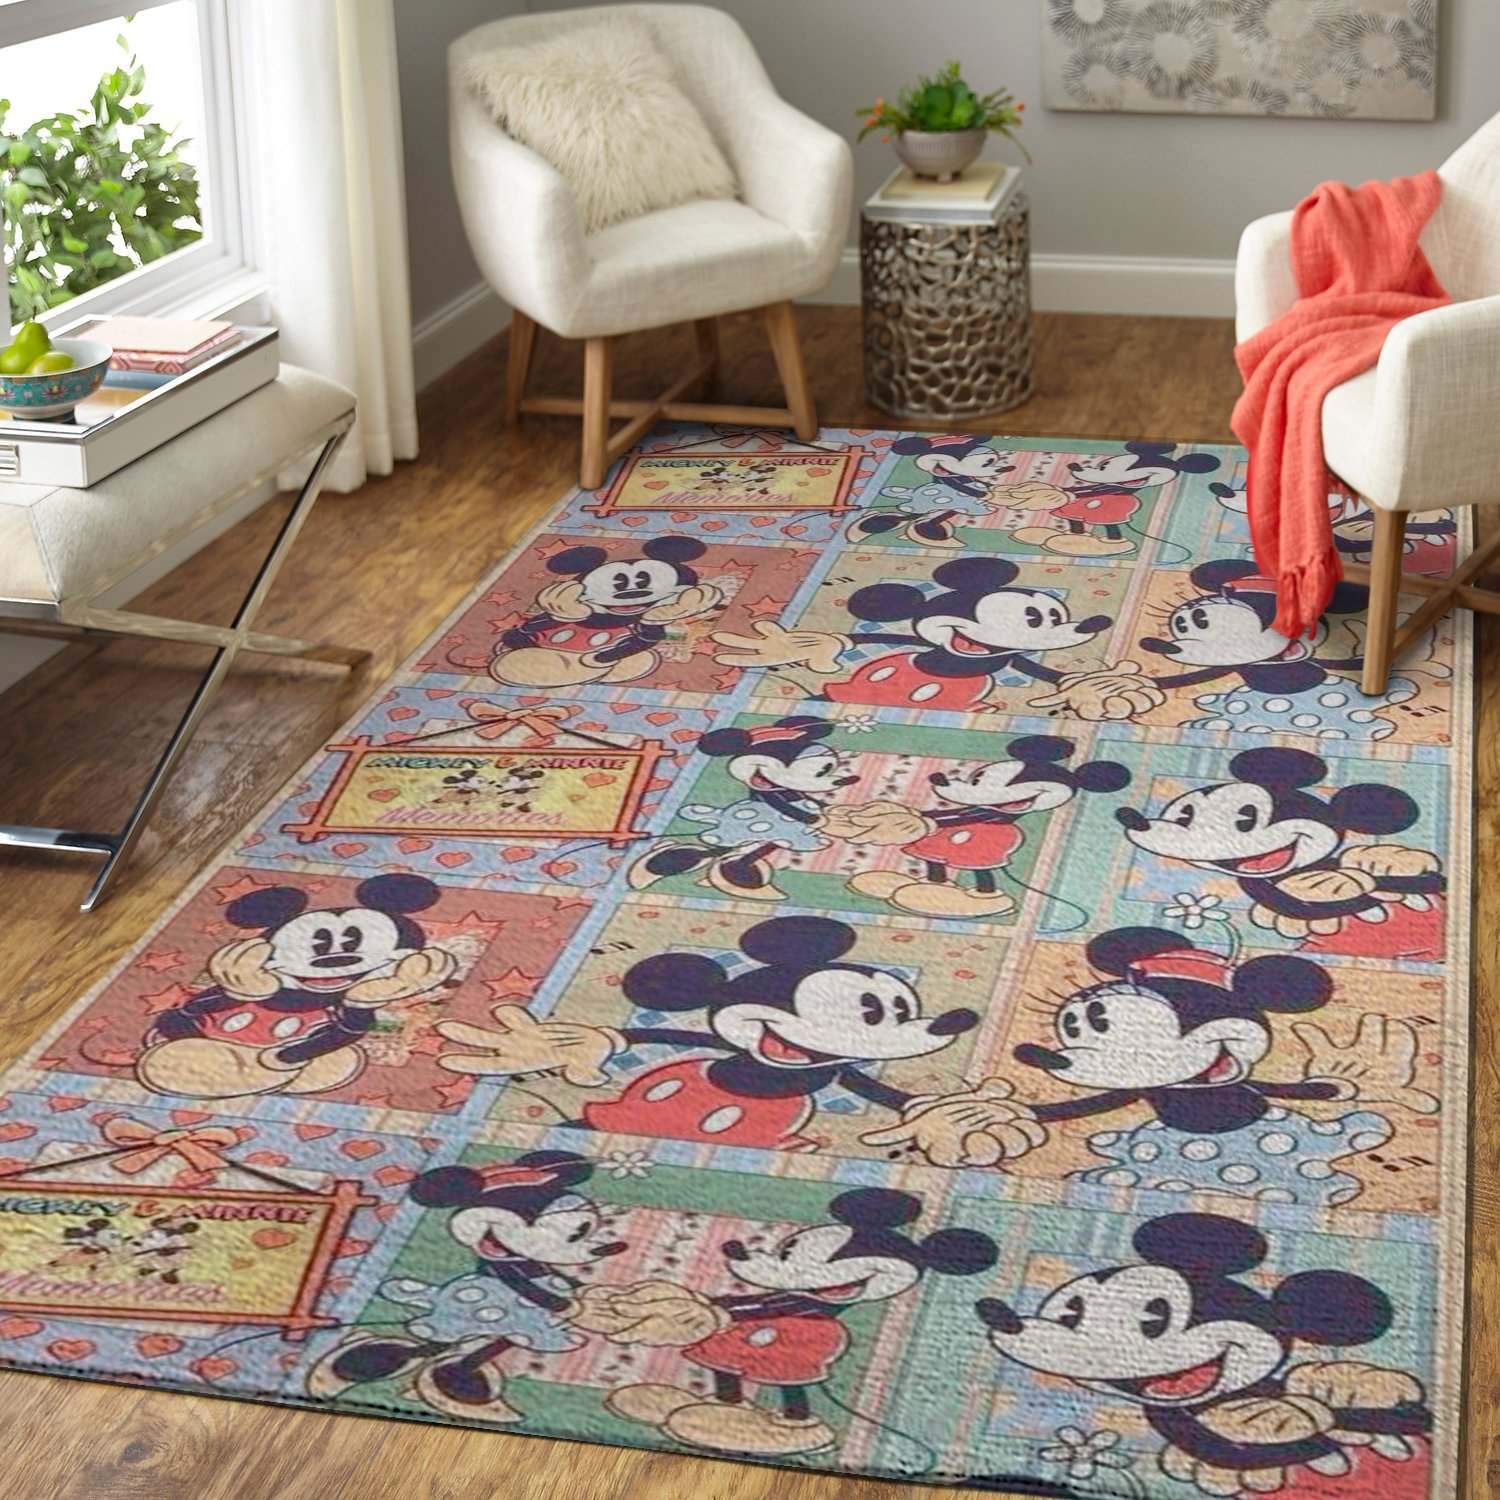 Disney Movie Character Mickey Mouse Area Limited Edition Amazon Best Seller Sku 267958 Rug